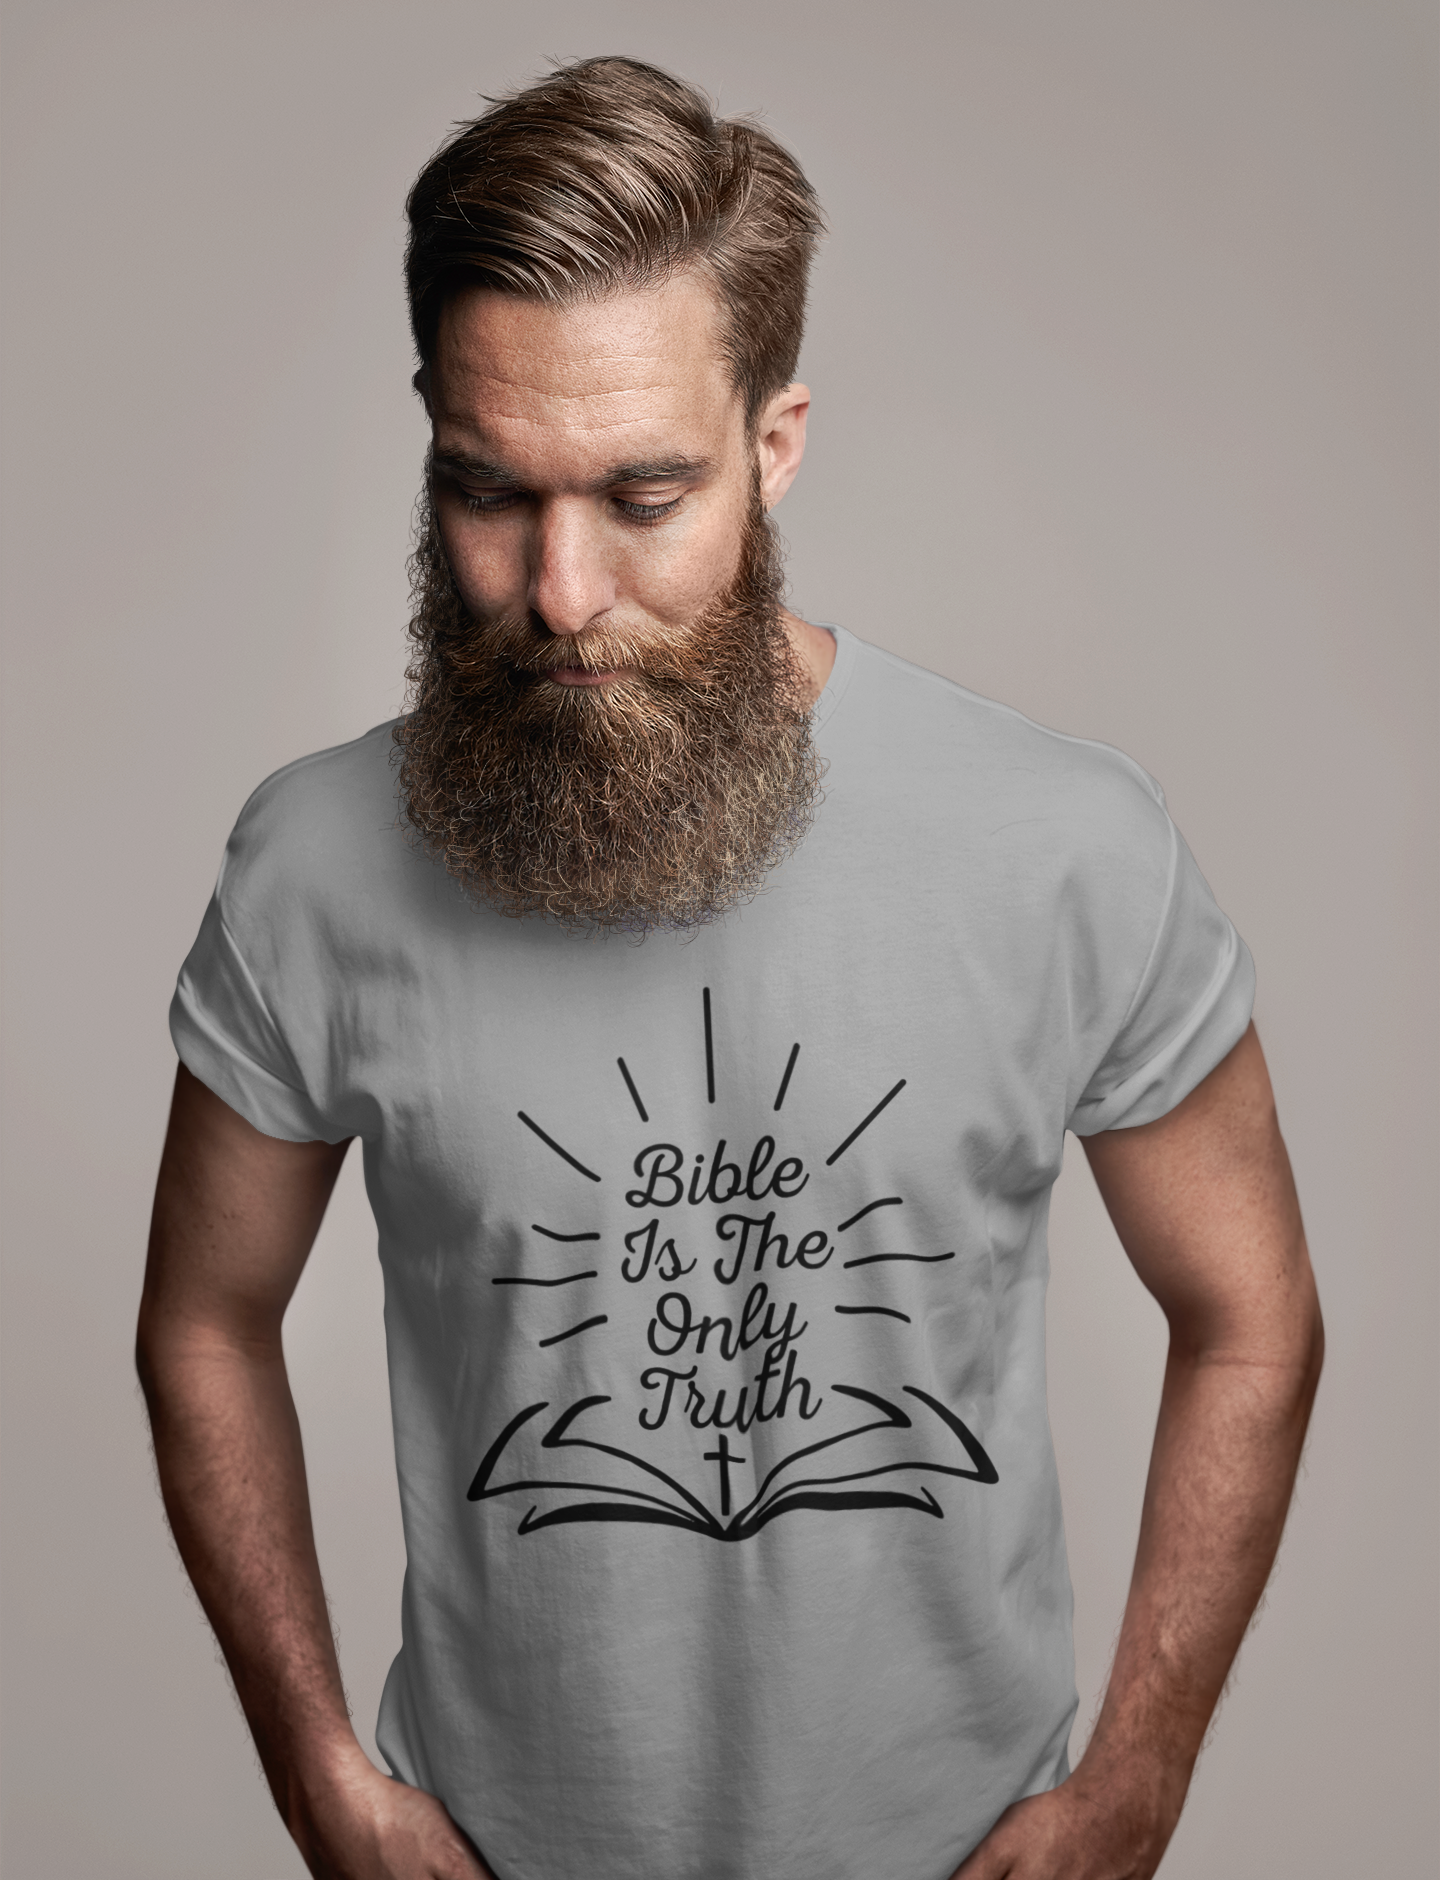 ULTRABASIC Men's T-Shirt Bible is the Only Truth - Bible Religious Shirt